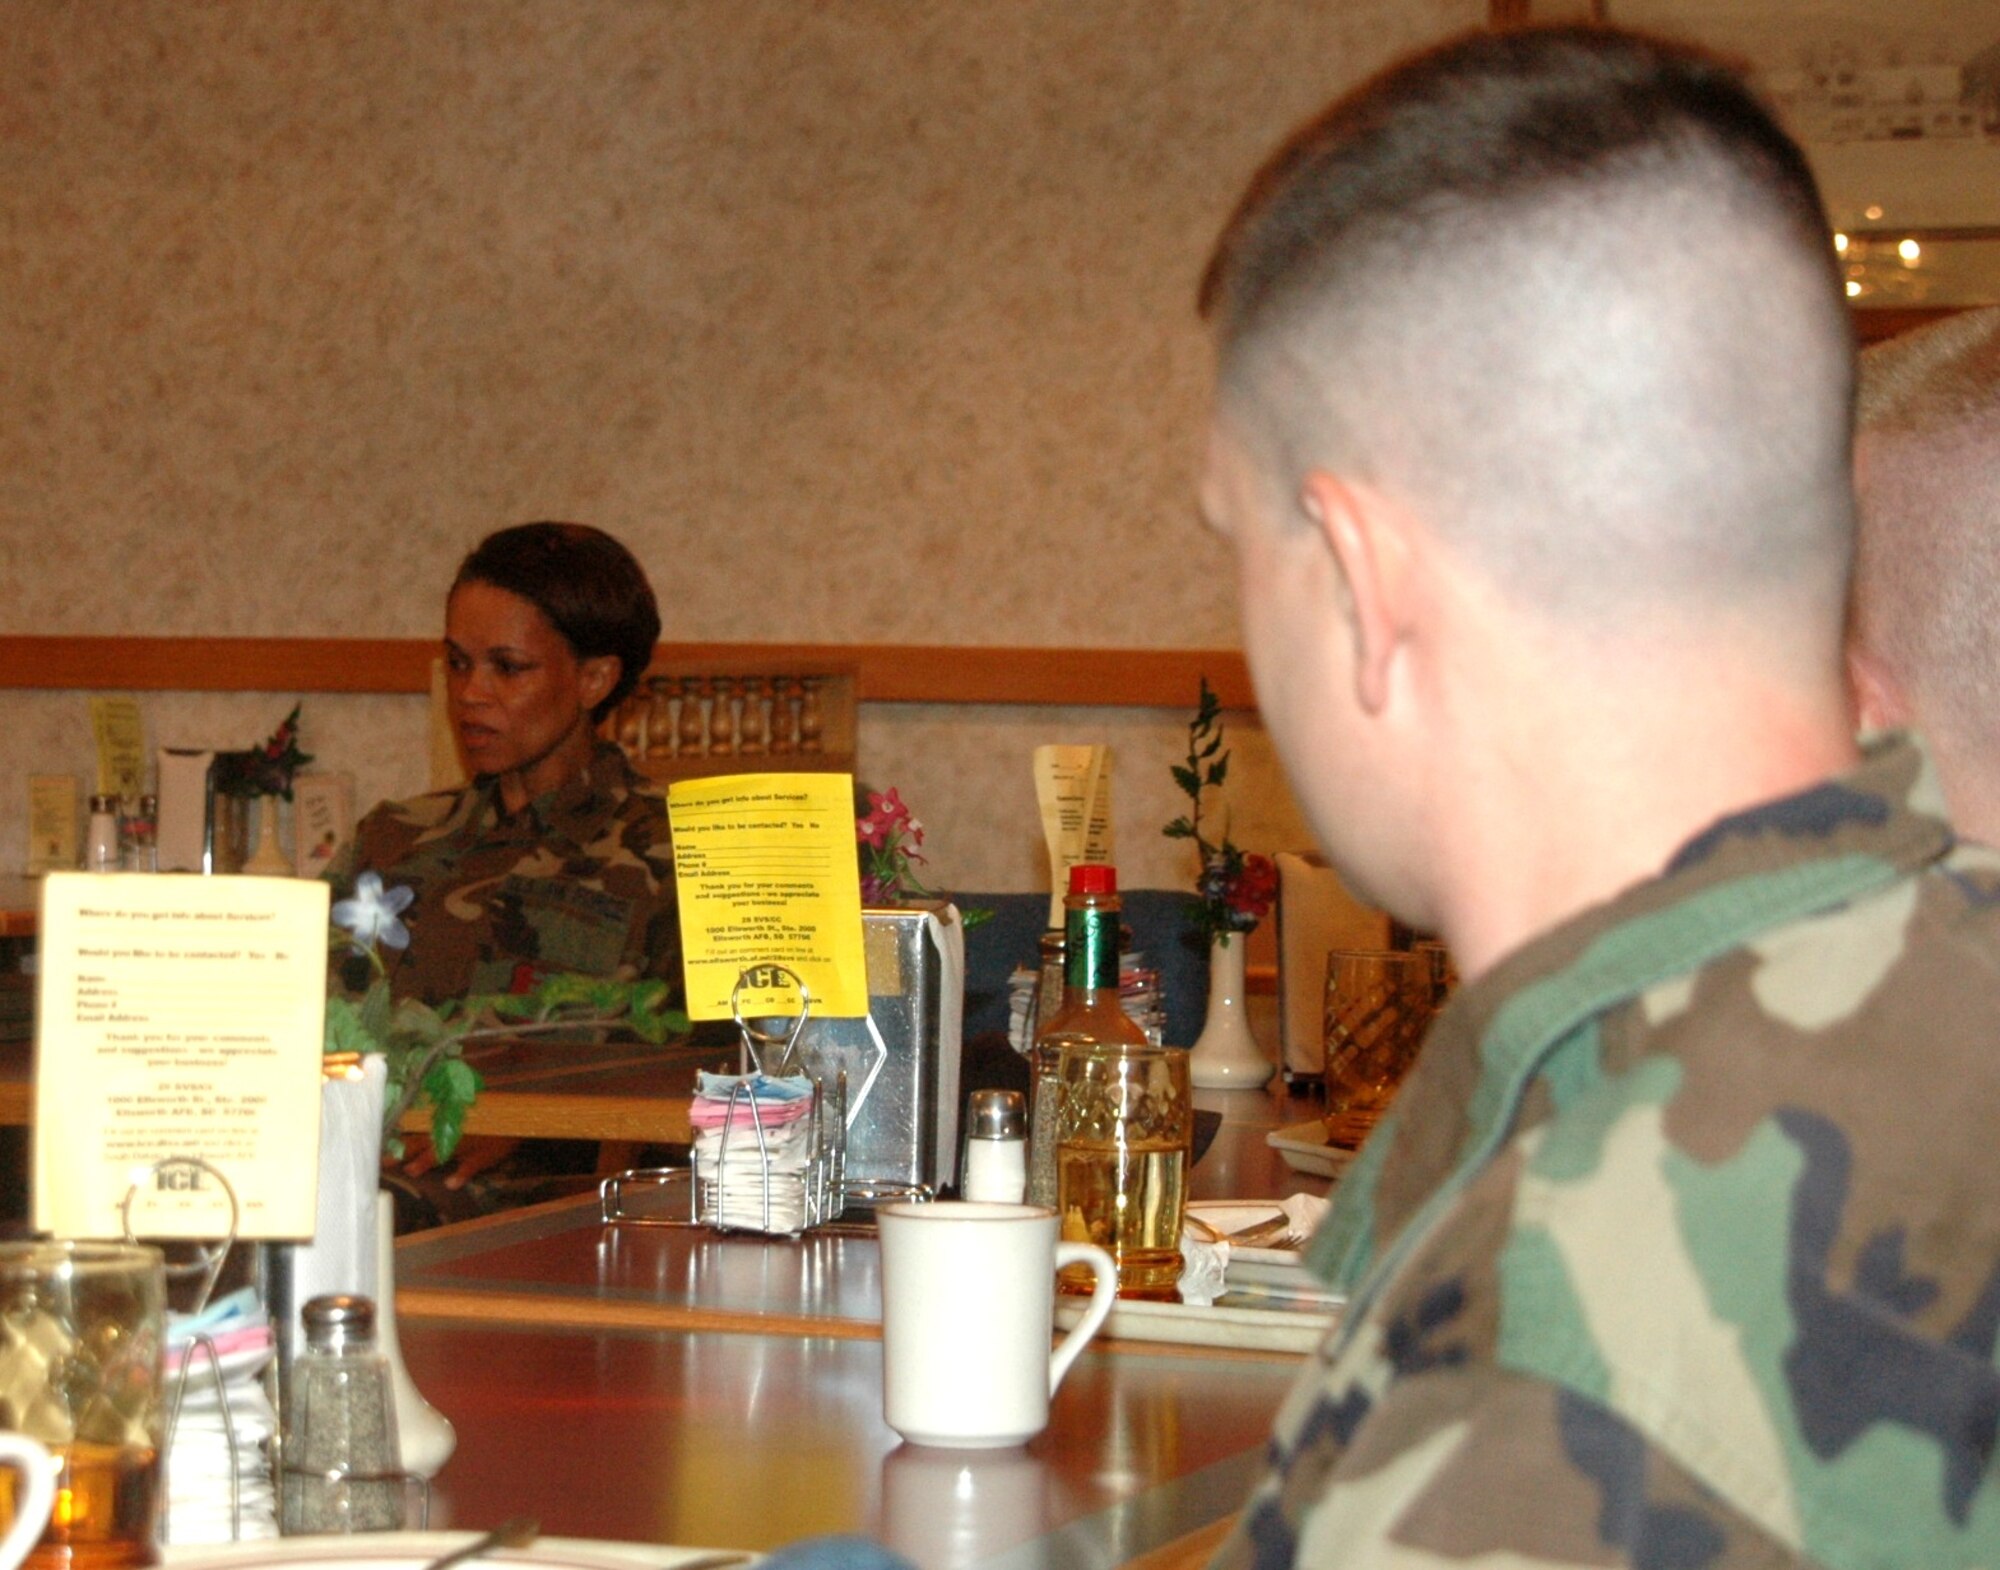 Colonel Renita Alexandar, 28th Bomb Wing Mission Support Group commander,  and Chief Master Sgt. Jim Urban, 28th Bomb Wing Mission Support Group chief, met with NCOs at the Bandit Inn dining facility on April 25. Colonel Alexander addressed issues such as the new 28th MSG realignment, performance reports, decorations and the role of supervisors.